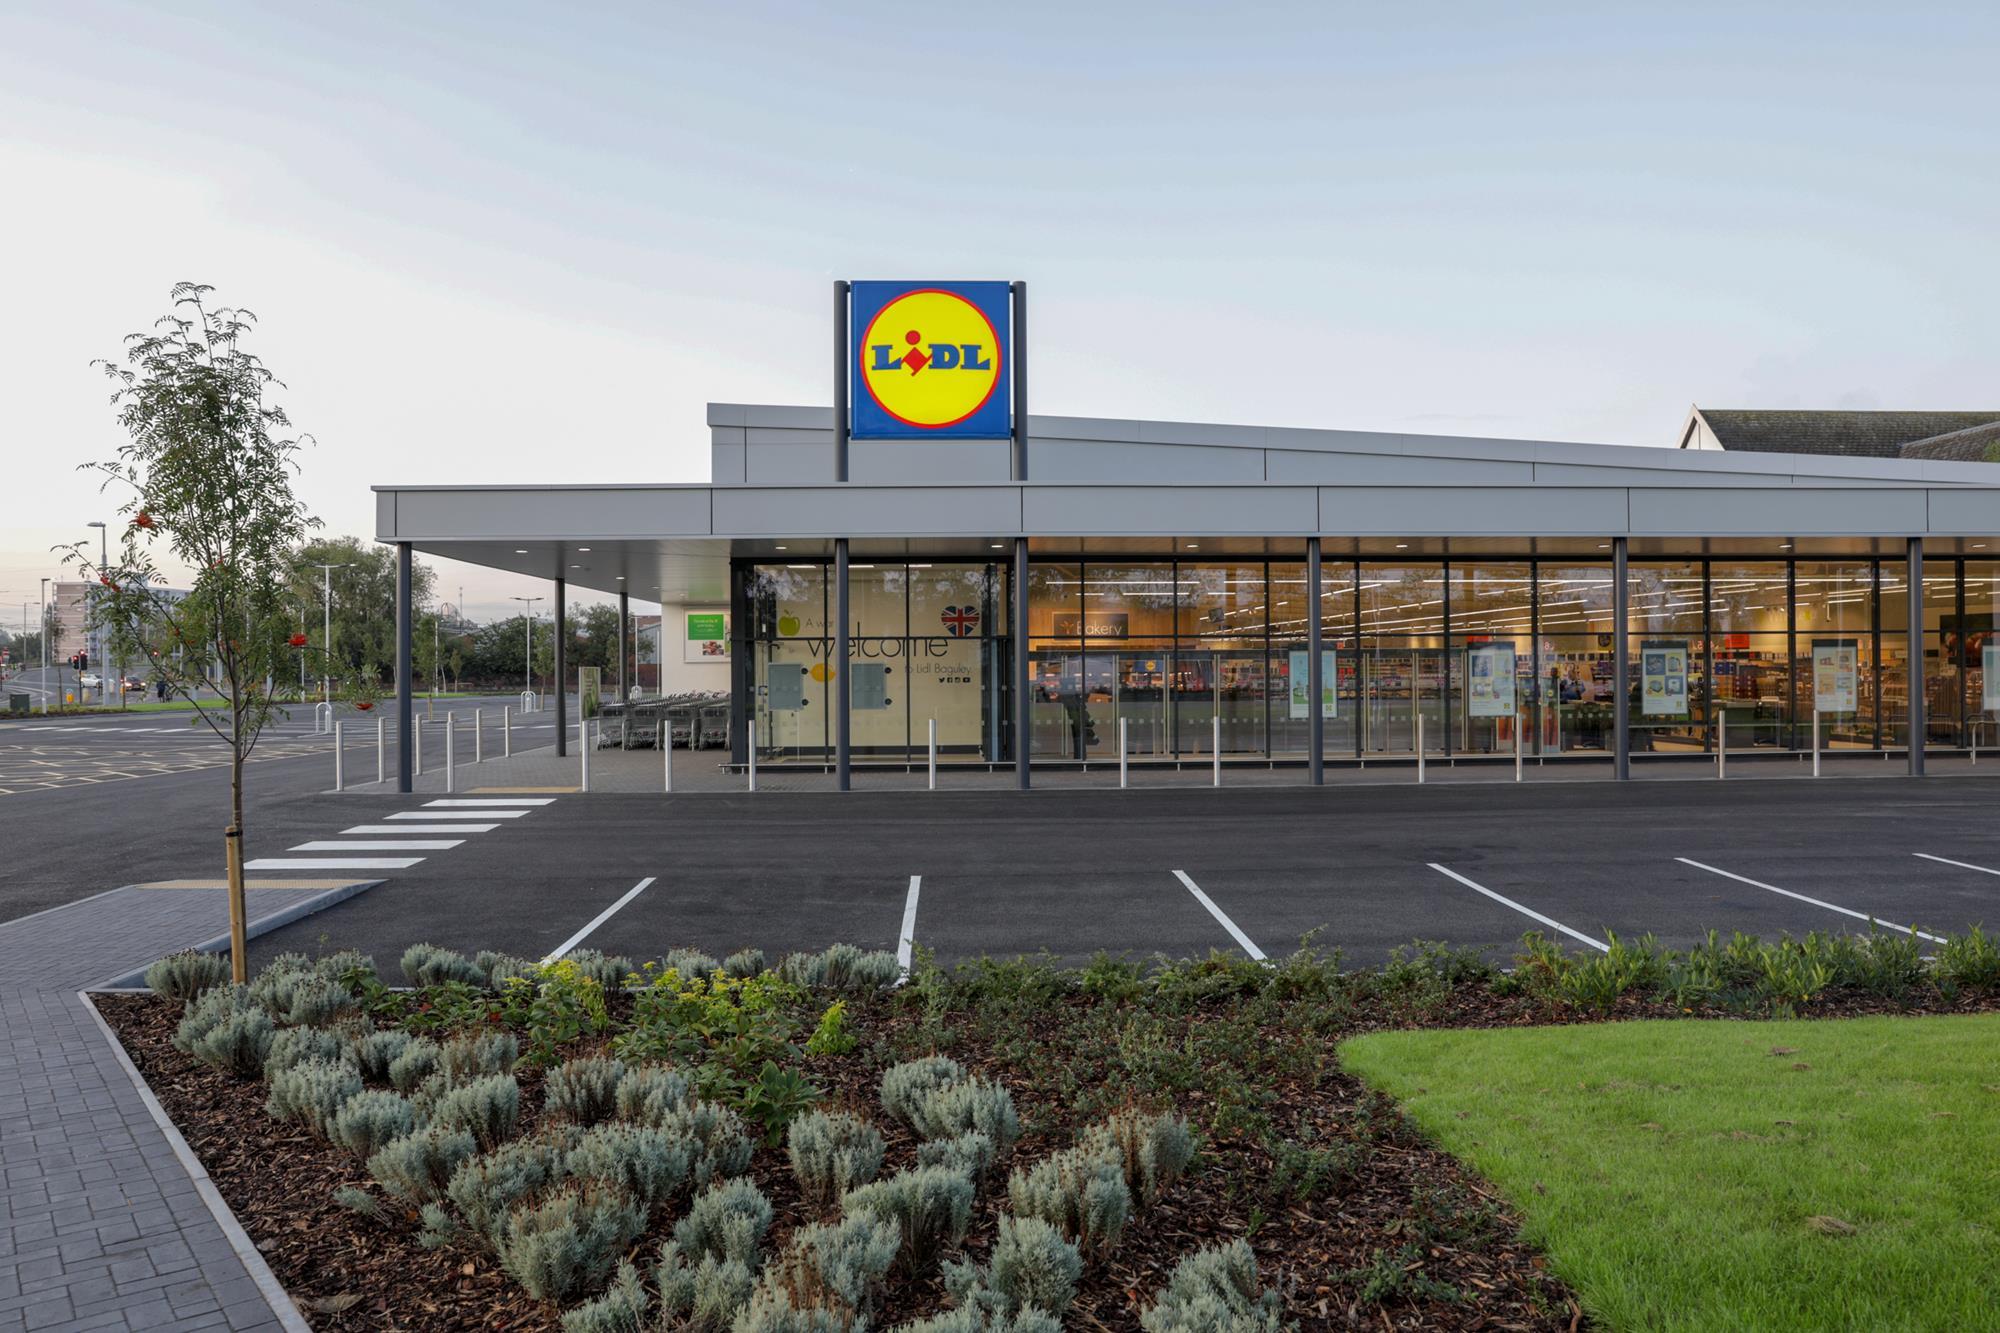 Lidl US Builds Sustainable Presence by Listening to Customers - Produce  Business